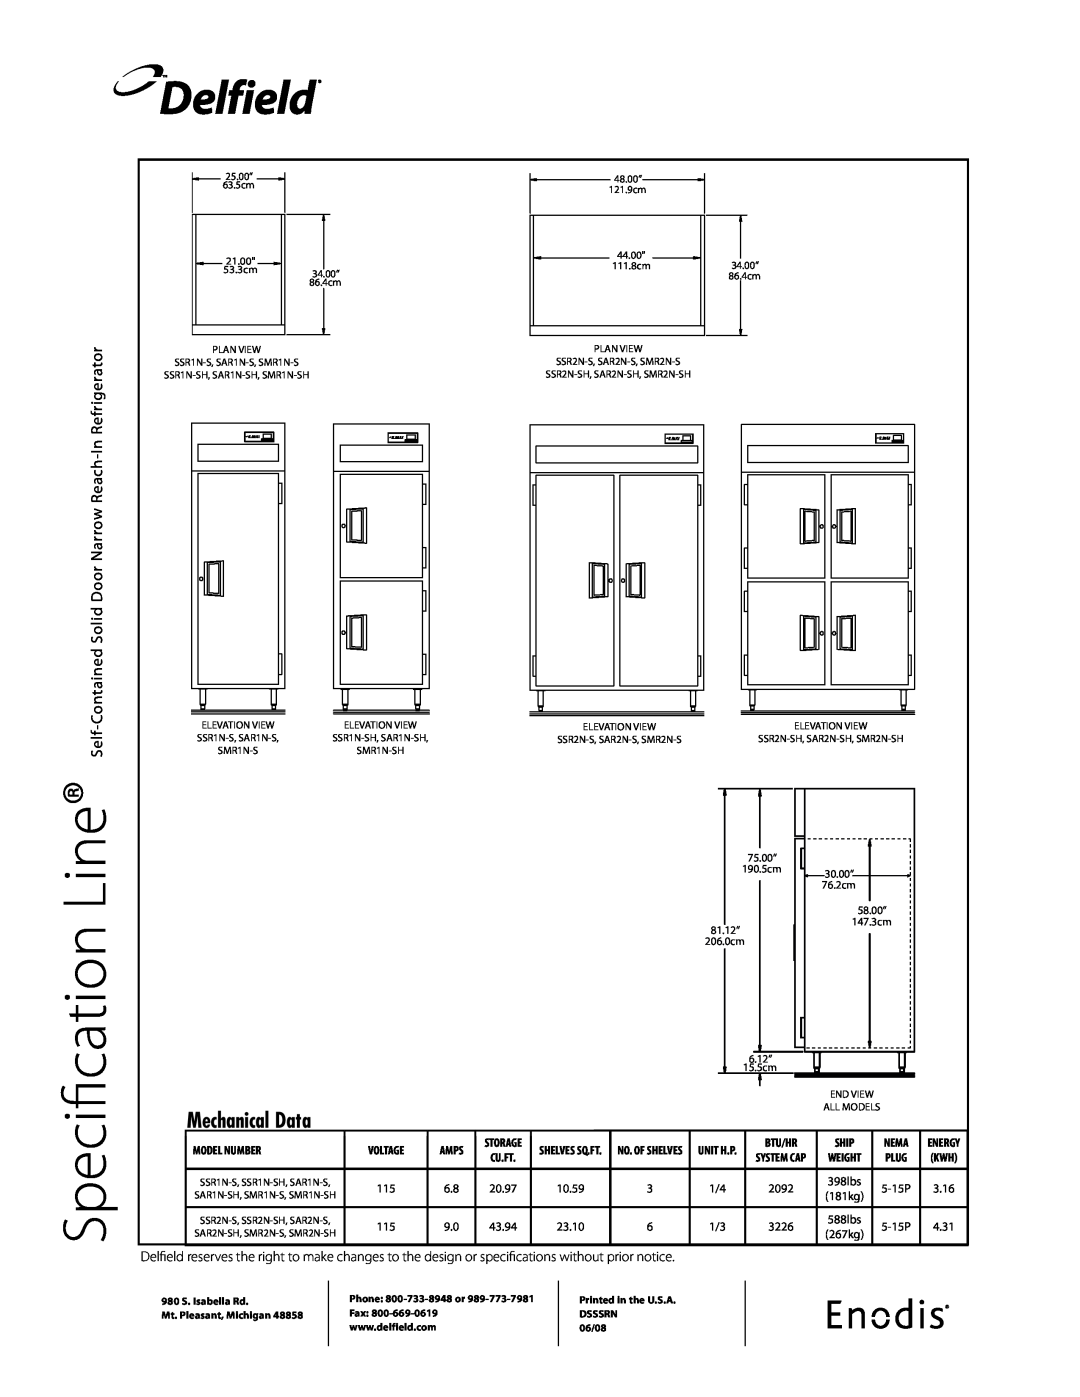 Delfield SSR2N-S Mechanical Data, Line, Specification, Delfield, Contained Solid Door Narrow Reach-In Refrigerator, Self 